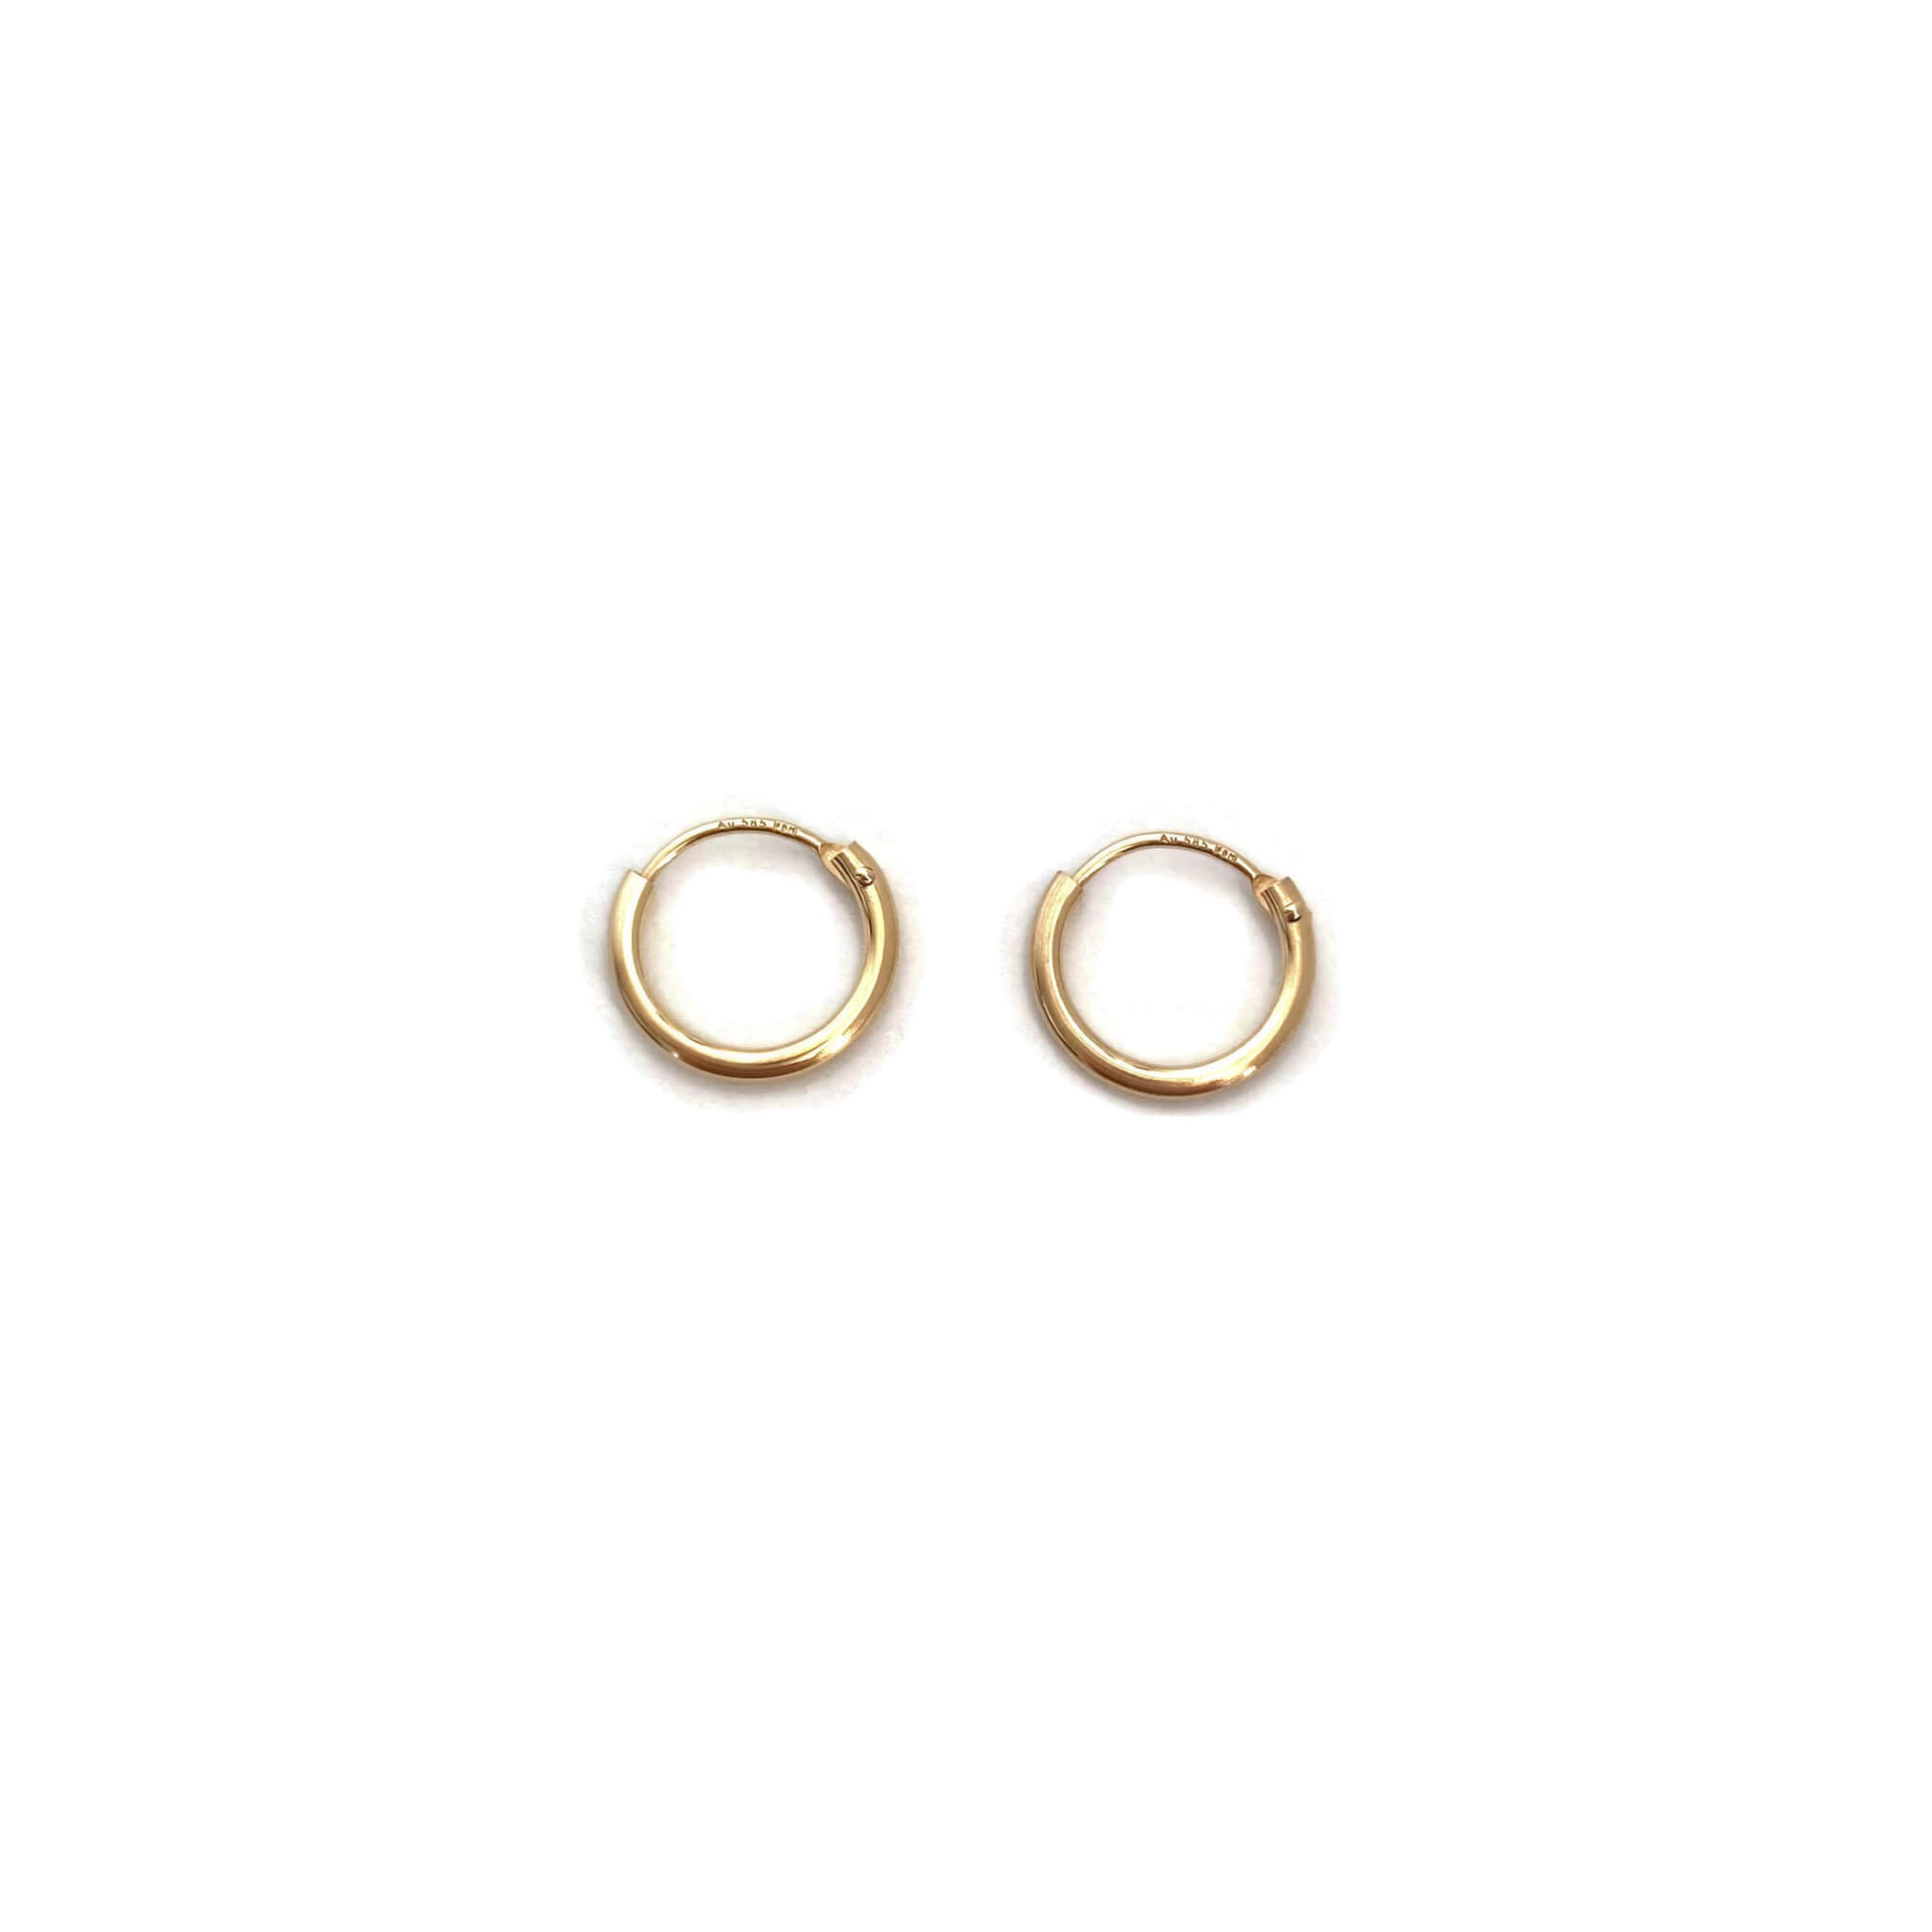 This is a pair of 10mm gold hoop earrings.  They are great 14k cartilage earrings that you can wear them 24/7